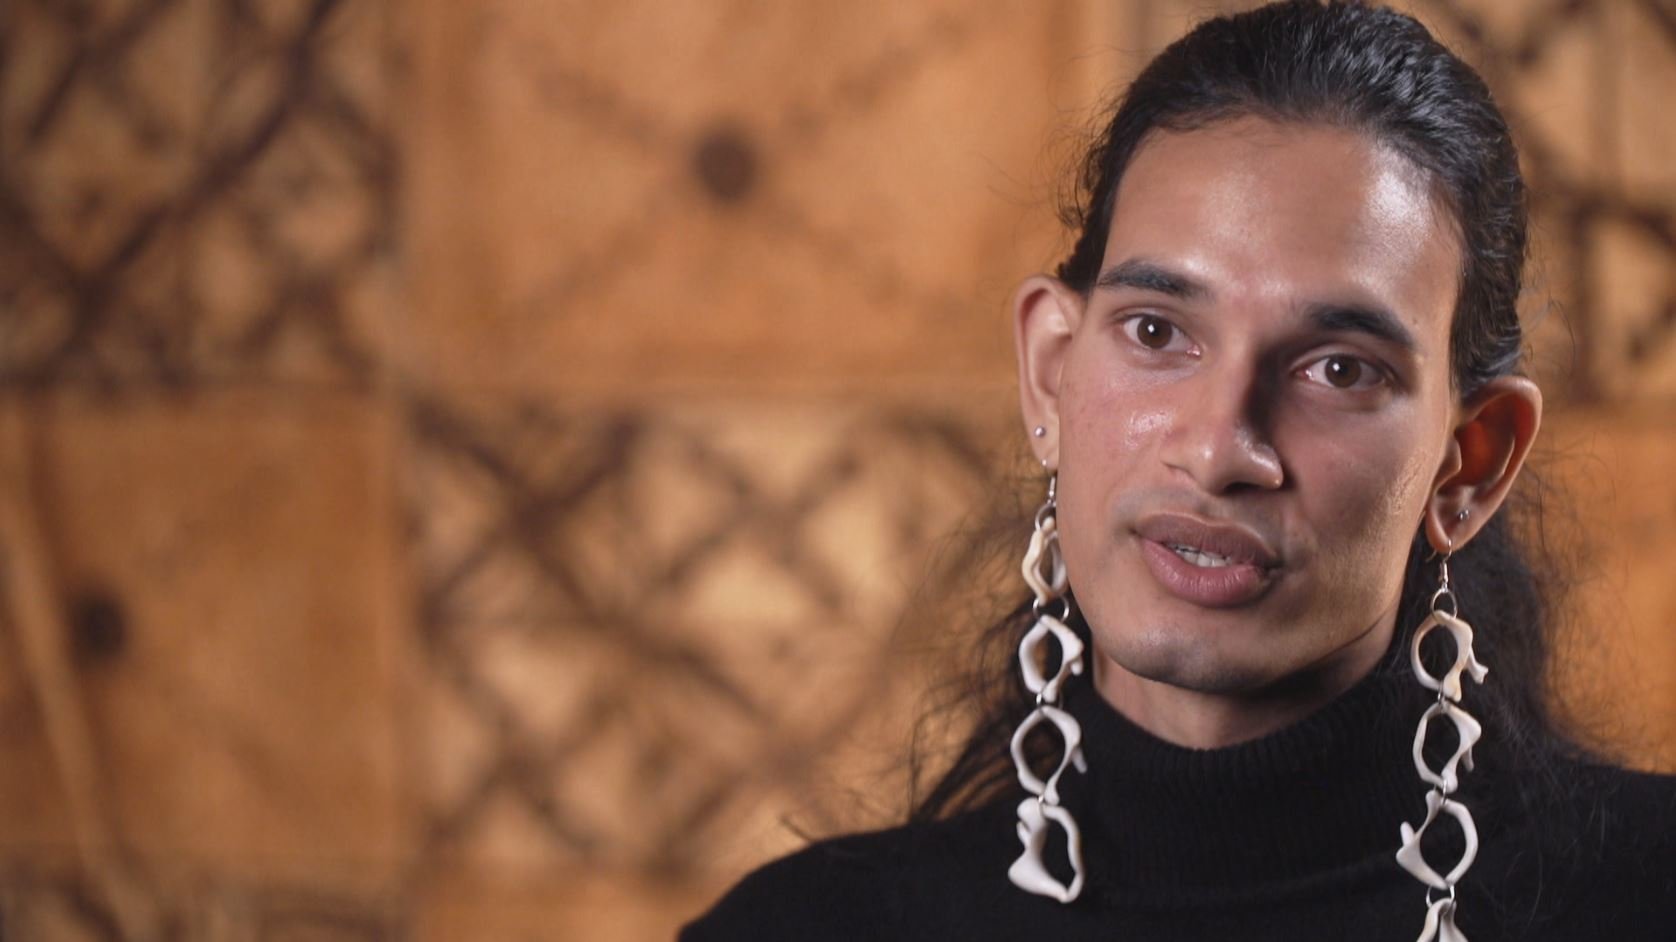 Shaneel Lal spoke to Tagata Pasifika about their activism